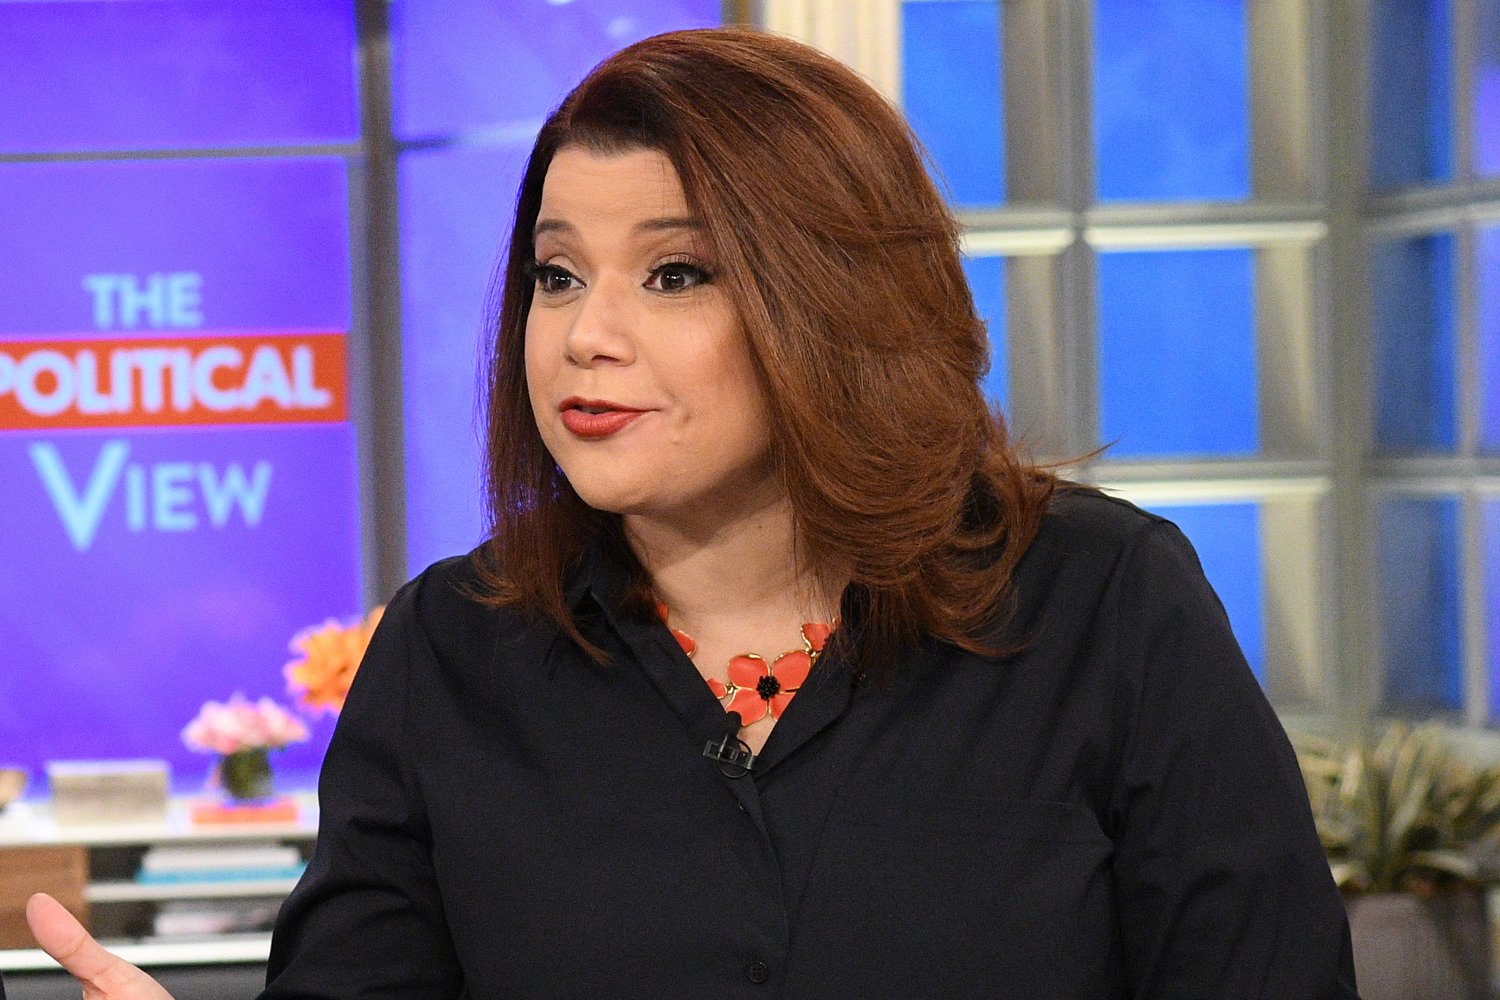 ‘The View’ Co-Host Ana Navarro Thirsting Over Daniel Craig Is Everything and Fans Agree